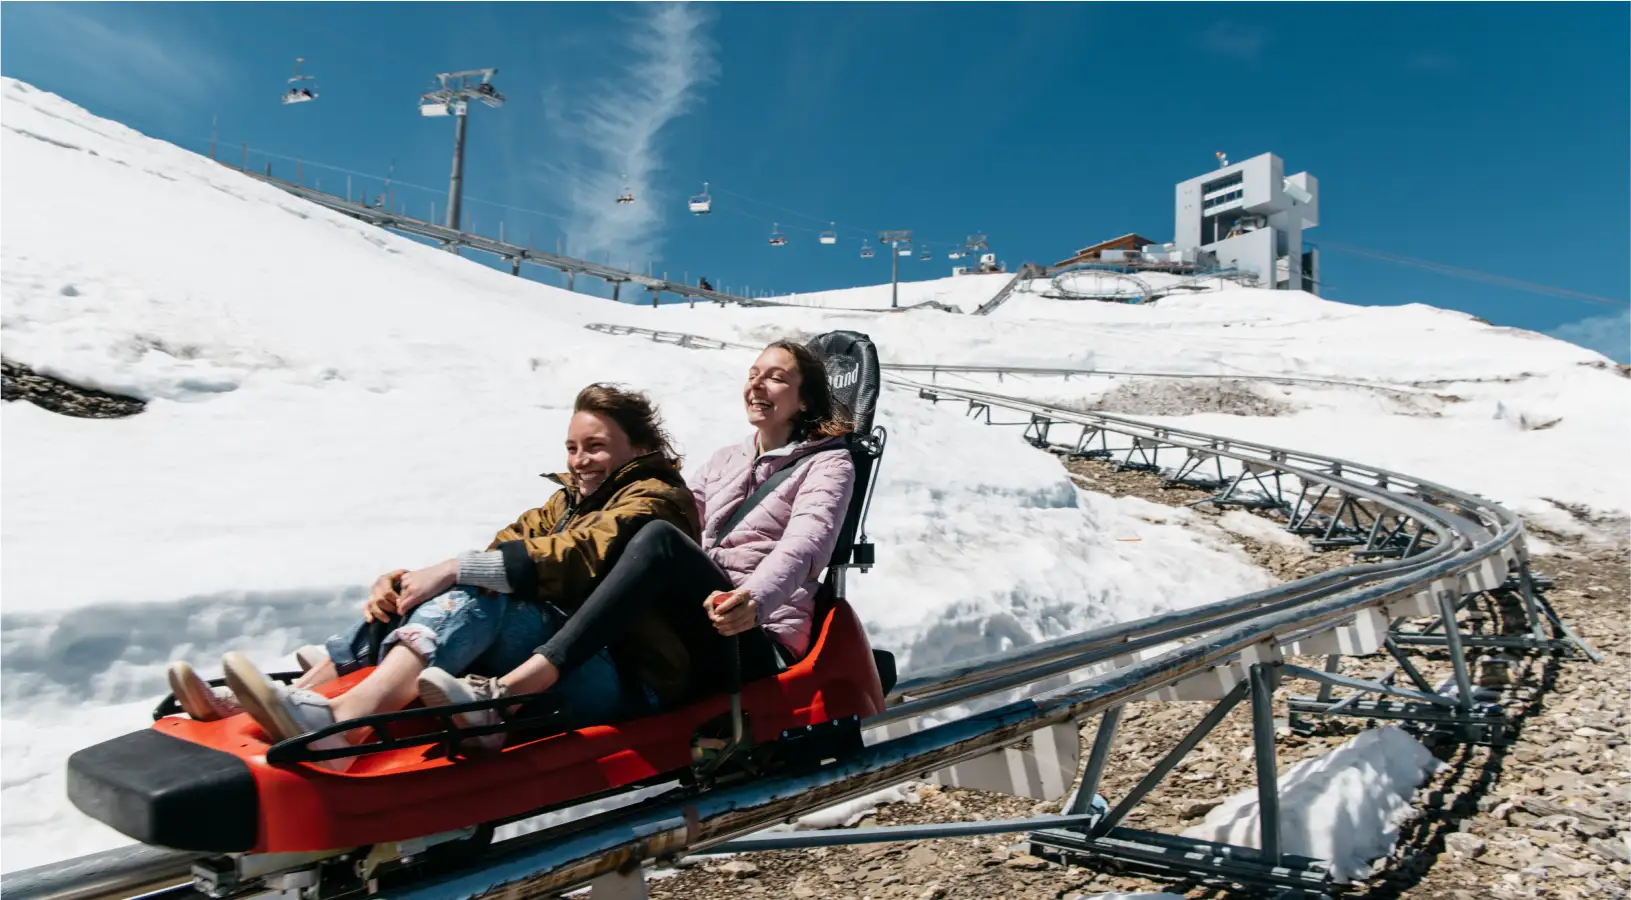 Swiss Pass price includes a discount on Glacier 3000